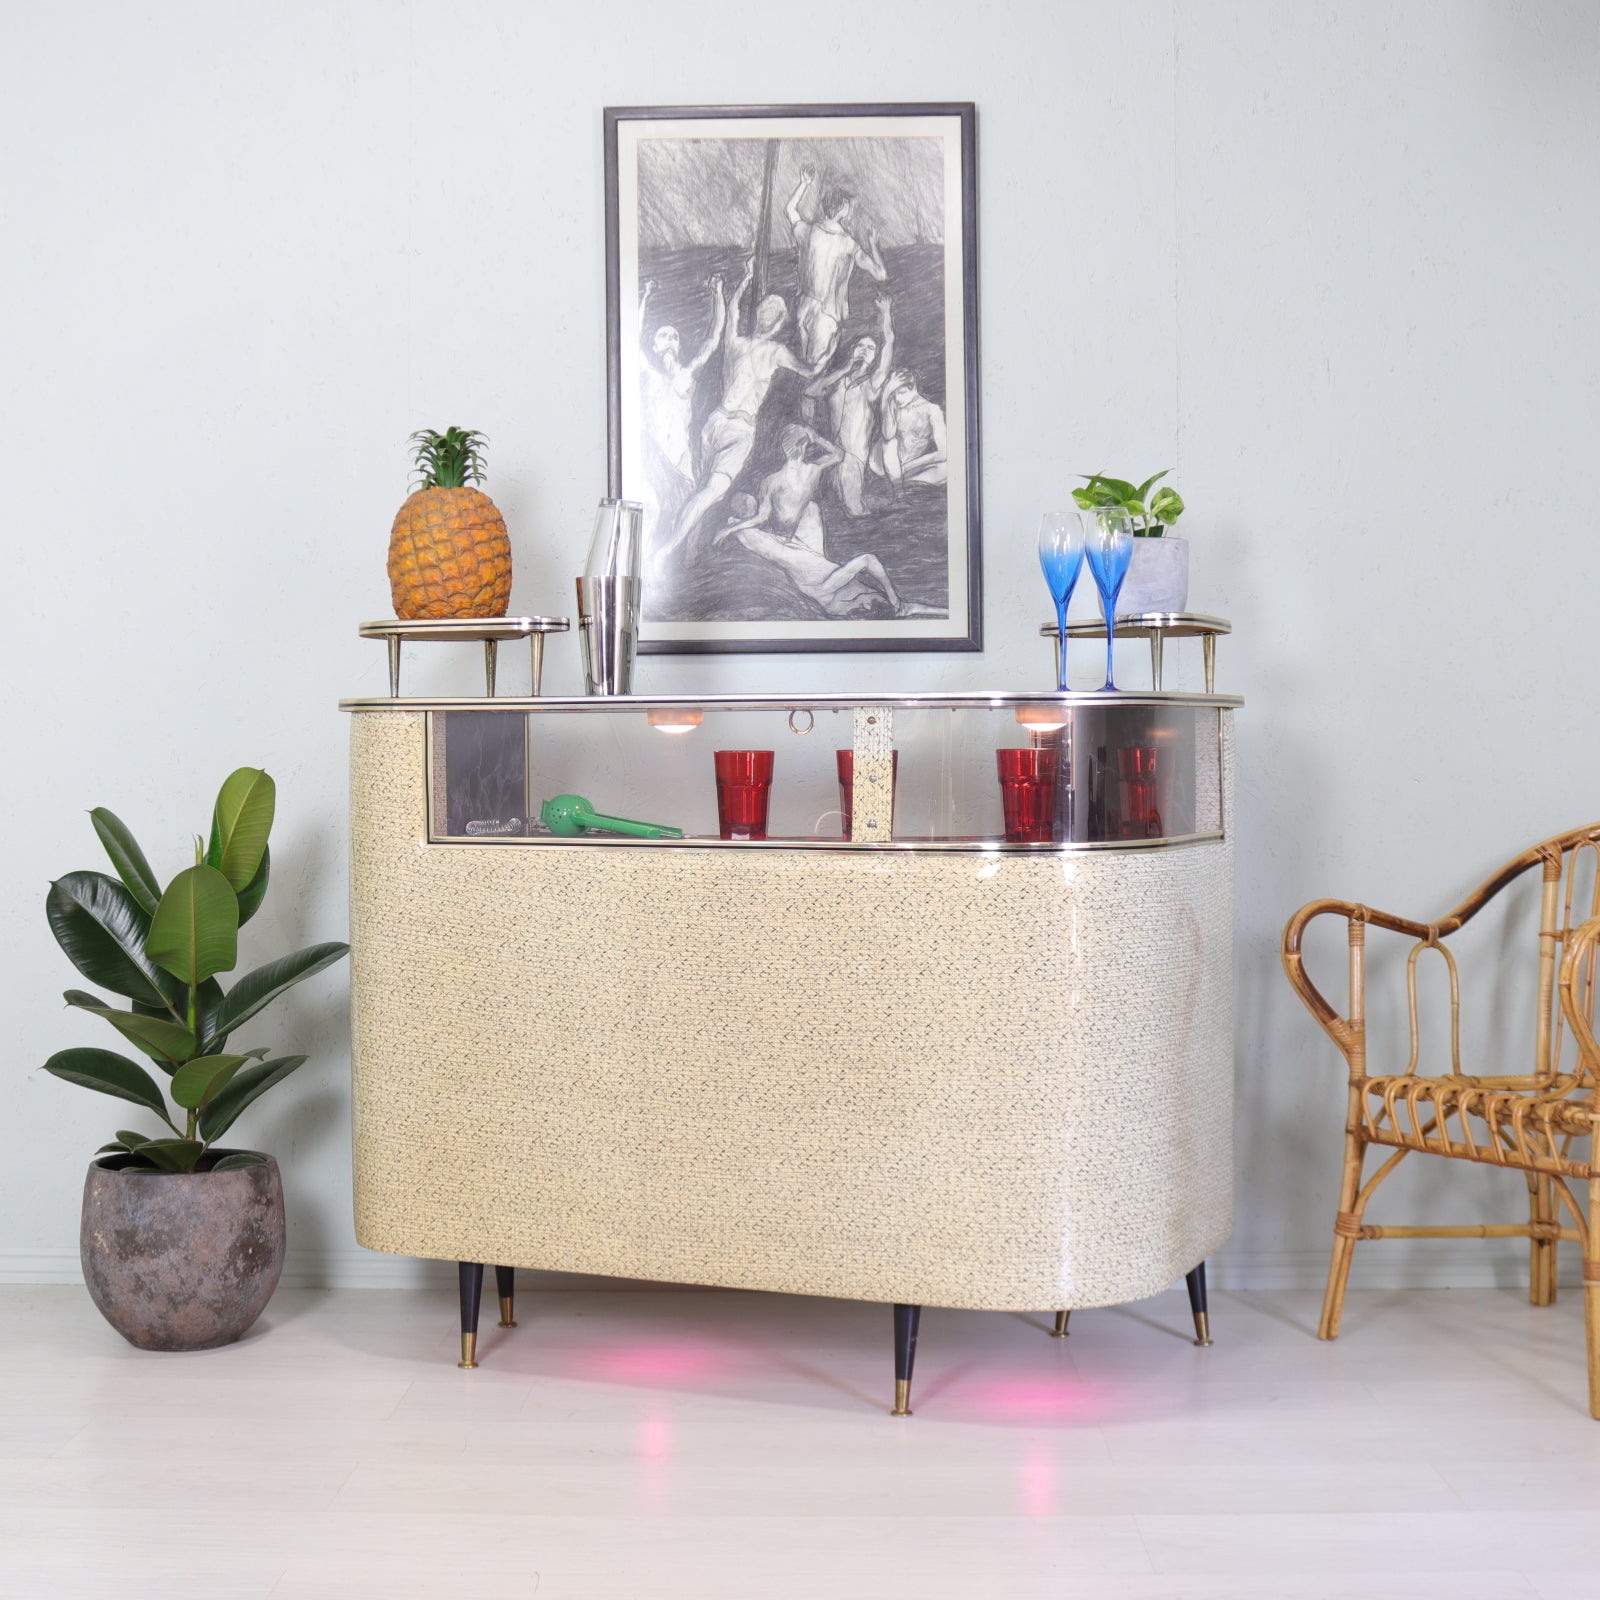 This Funky Retro Bar is Stocked With Vinyls, Cocktails